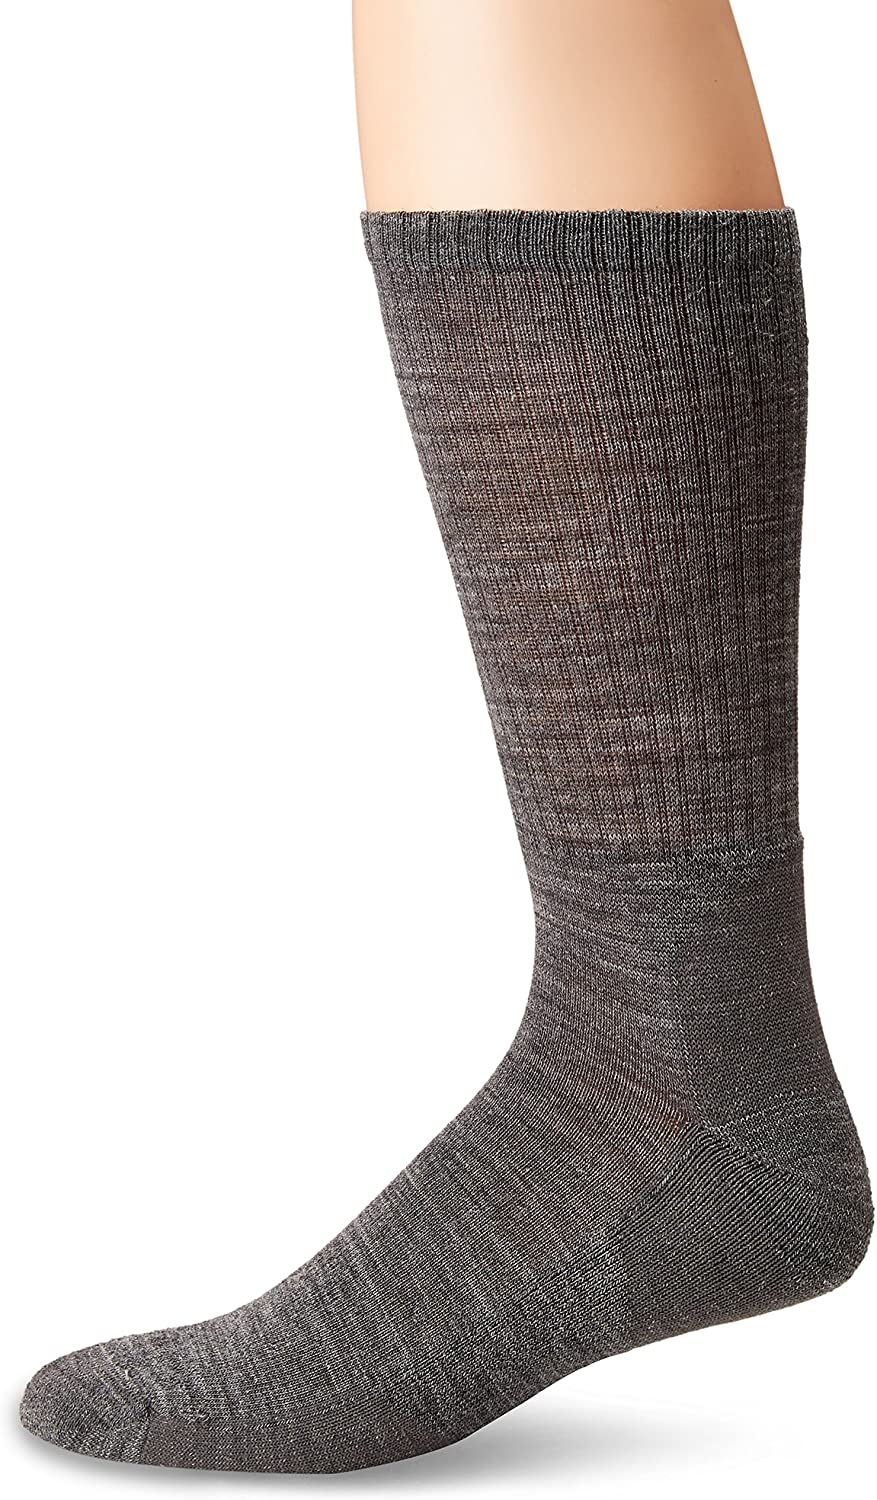 Men's Smartwool Heathered Rib Crew Sock in Medium Gray from the side